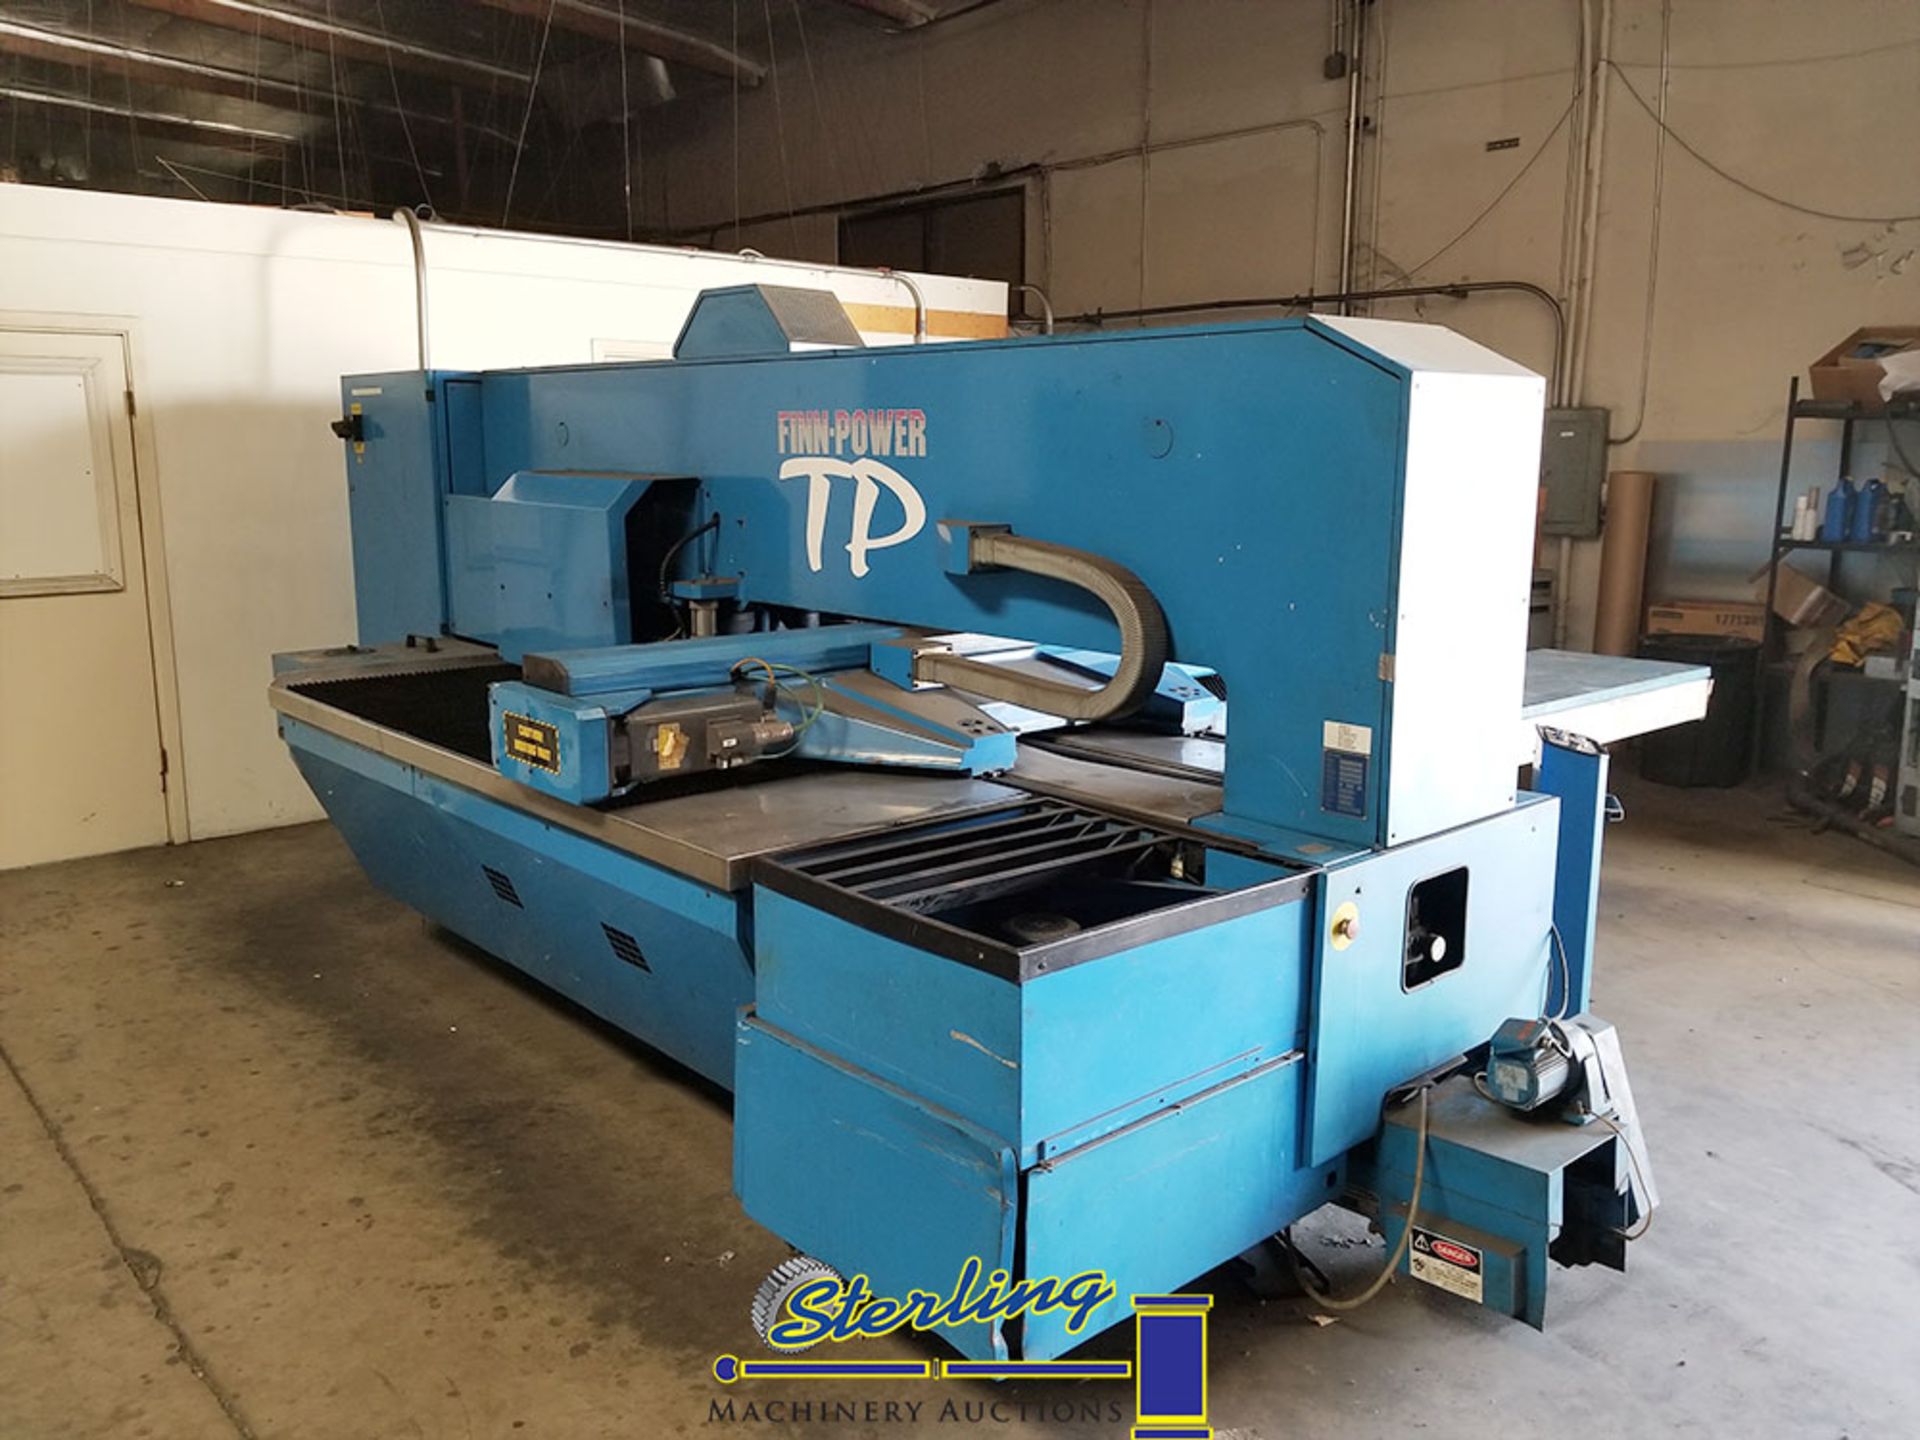 Finn-Power TP 2015-IF2 Hydraulic CNC Turret Punch with Siemens 3 CNC Control and tooling (ANAHEIM) - Image 30 of 31